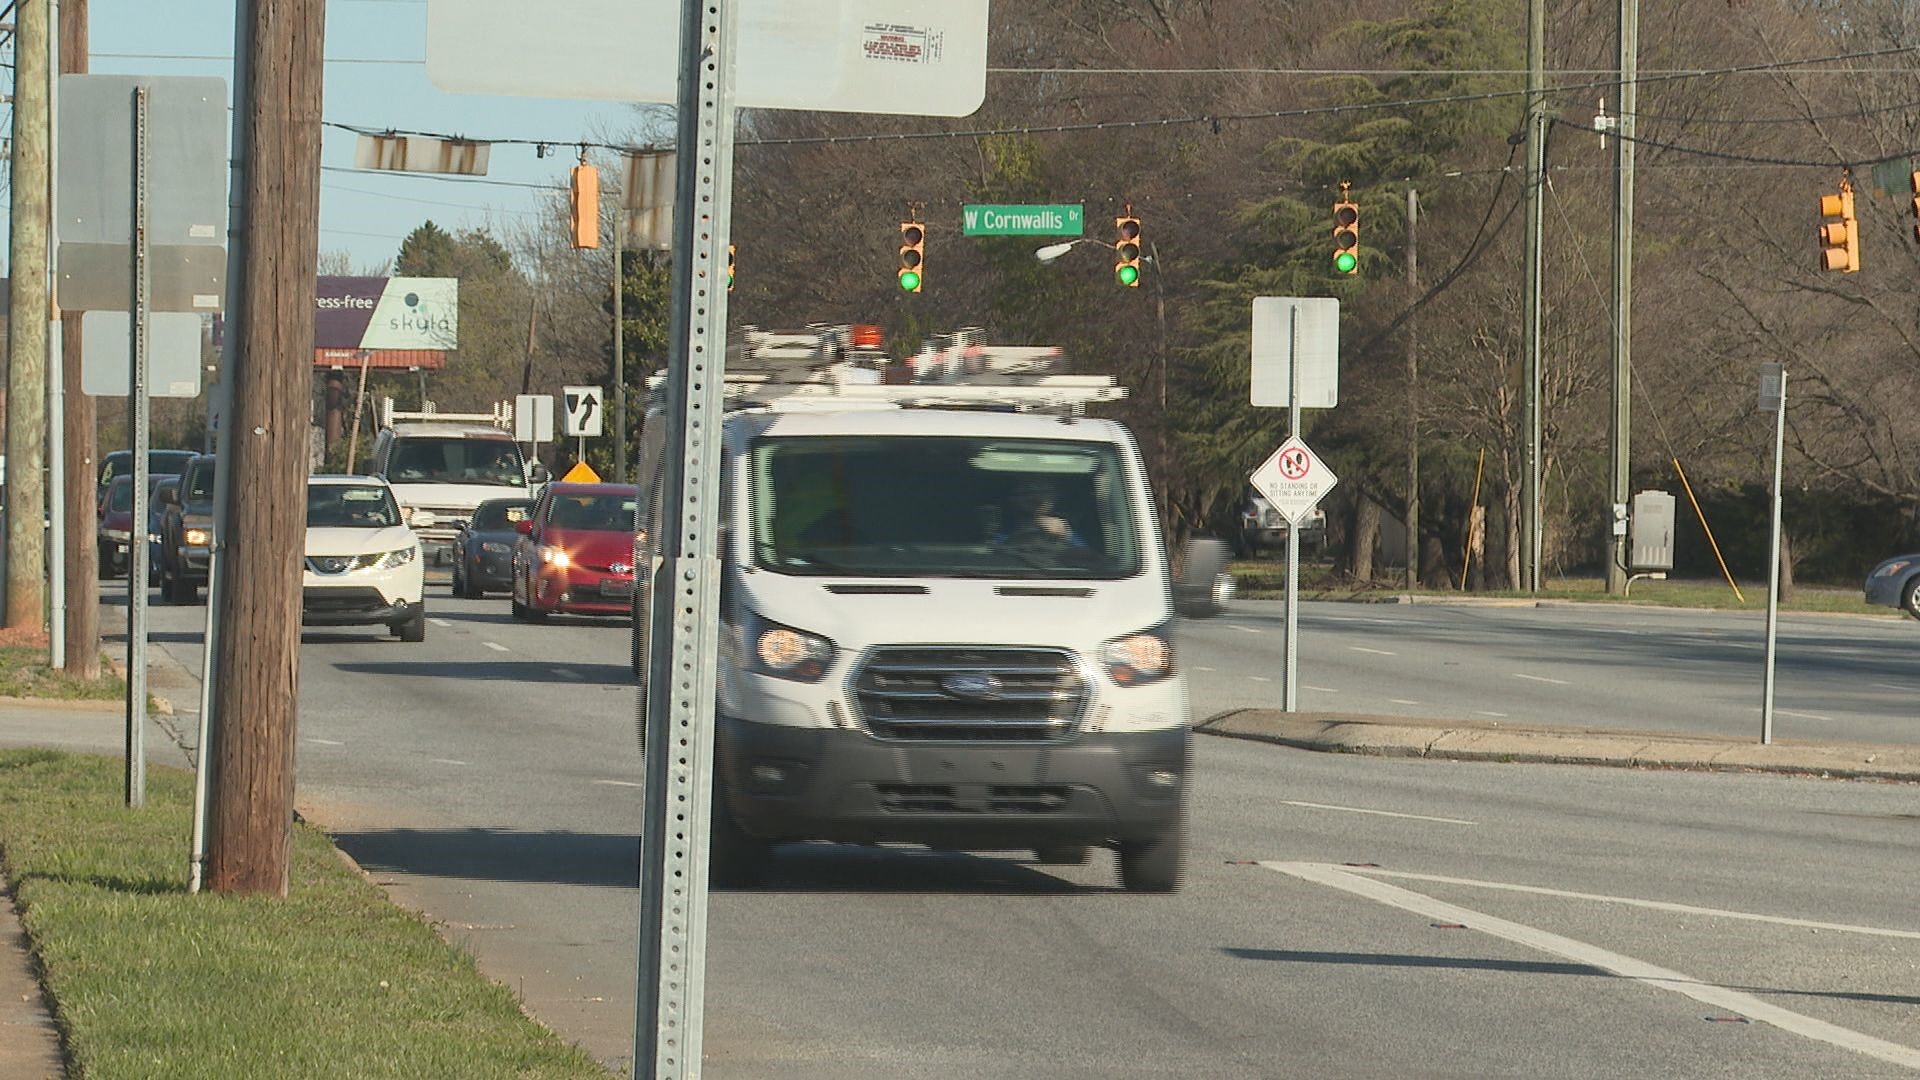 Changes could be coming to the highly-traveled Battleground/Lawndale/Westover Terrace interchange in Greensboro. Public comment is needed first.